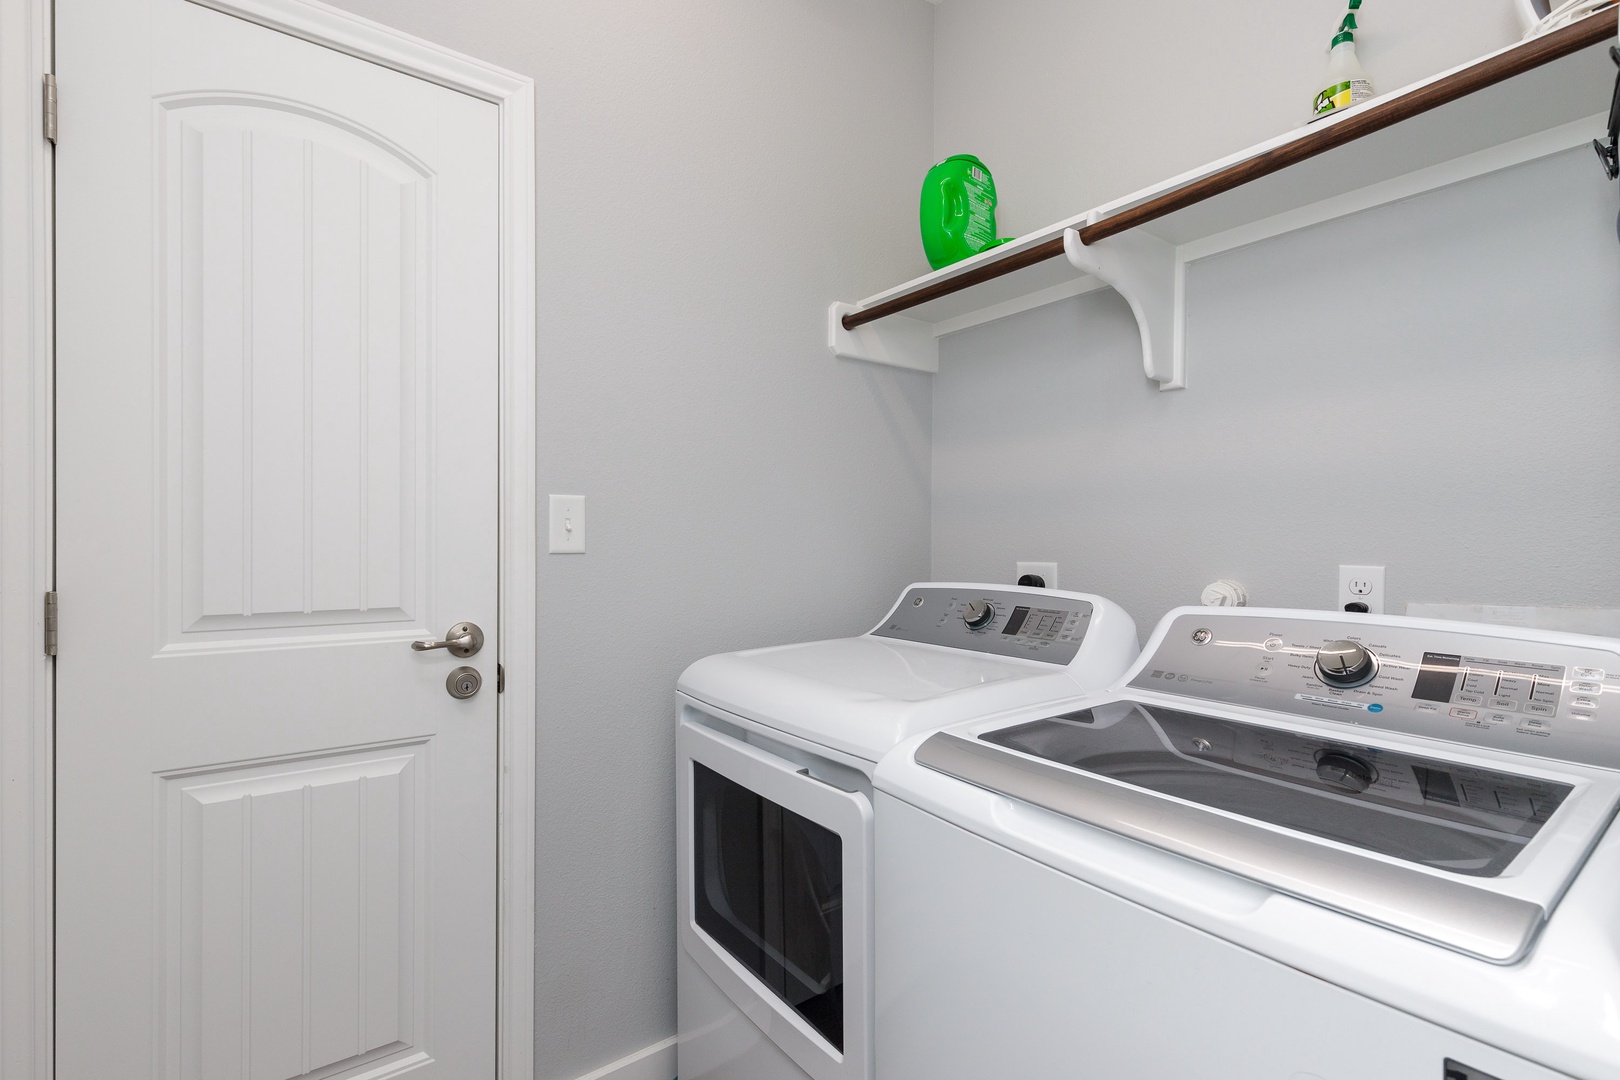 Private laundry is available for your stay, located on the 2nd level